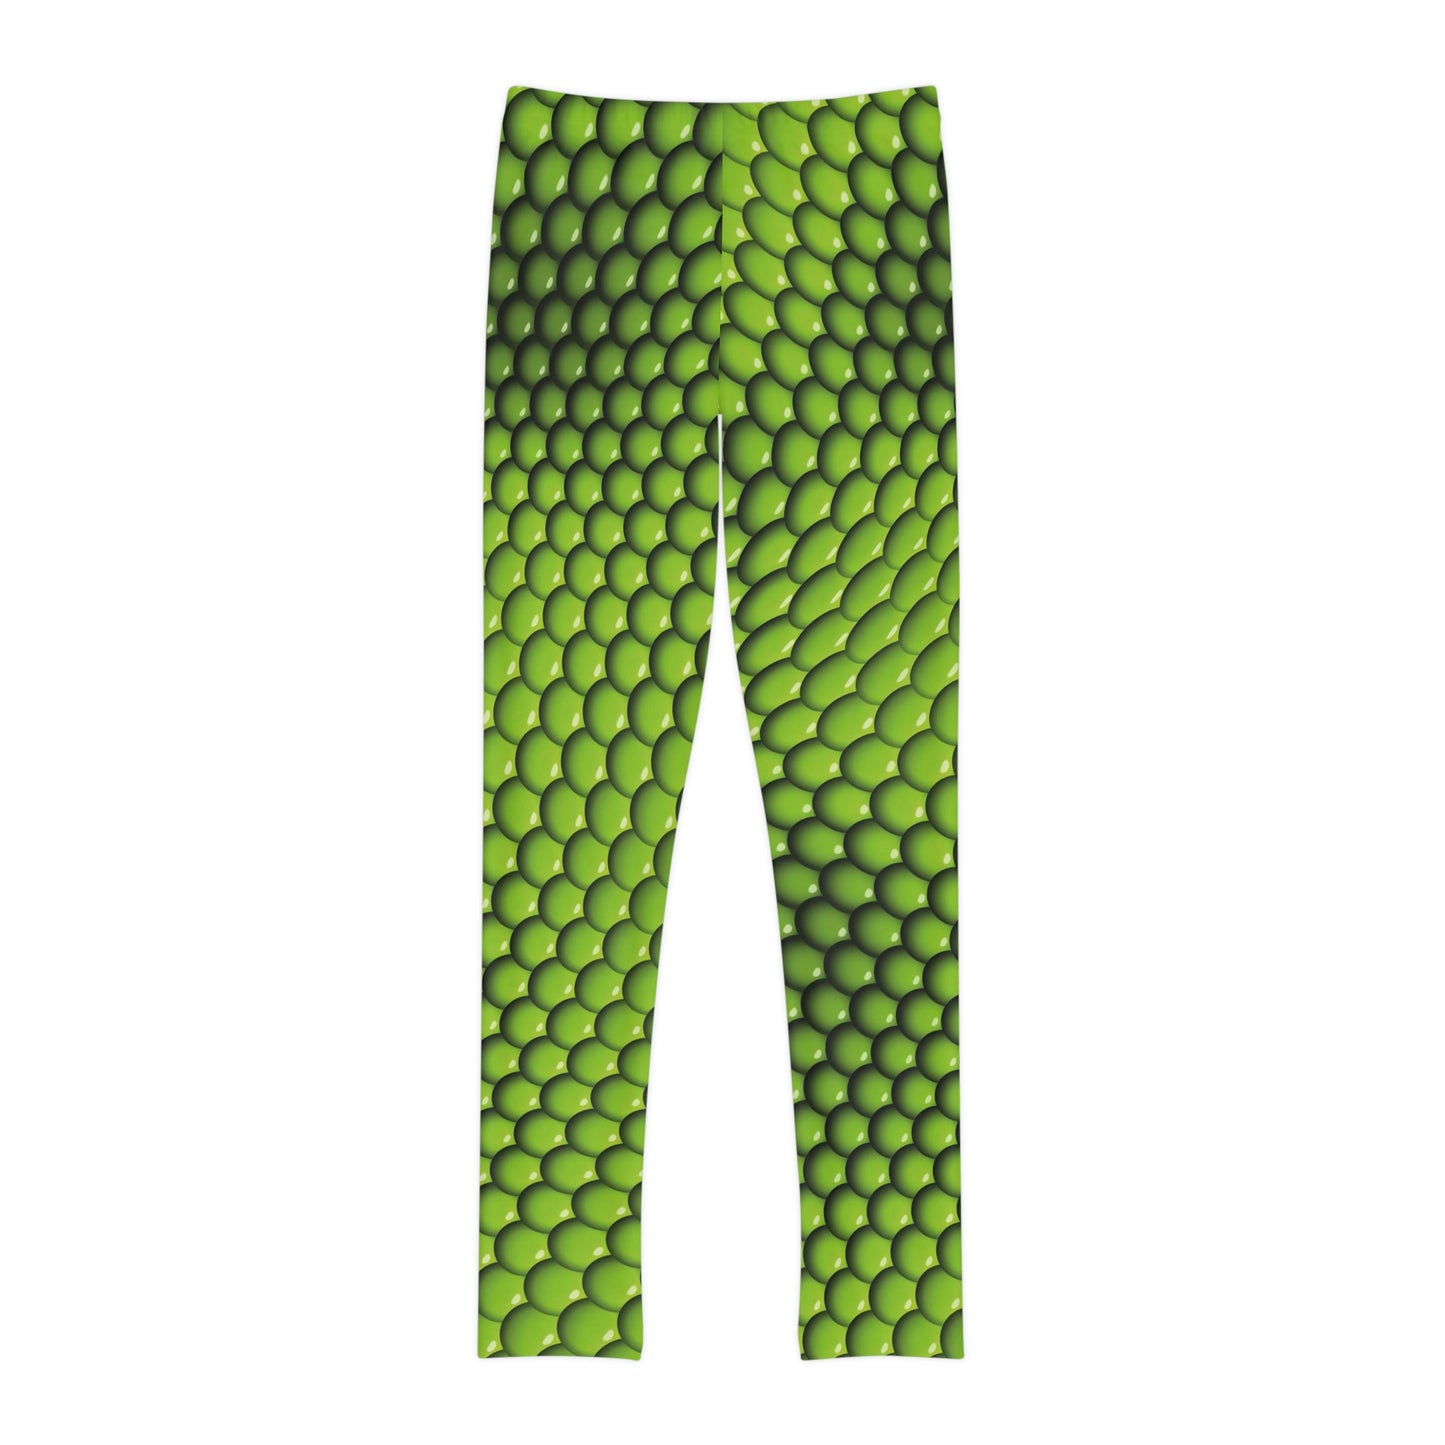 Lizard animal kingdom, Safari Youth Leggings, One of a Kind Gift - Unique Workout Activewear tights for kids, Daughter, Niece Christmas Gift